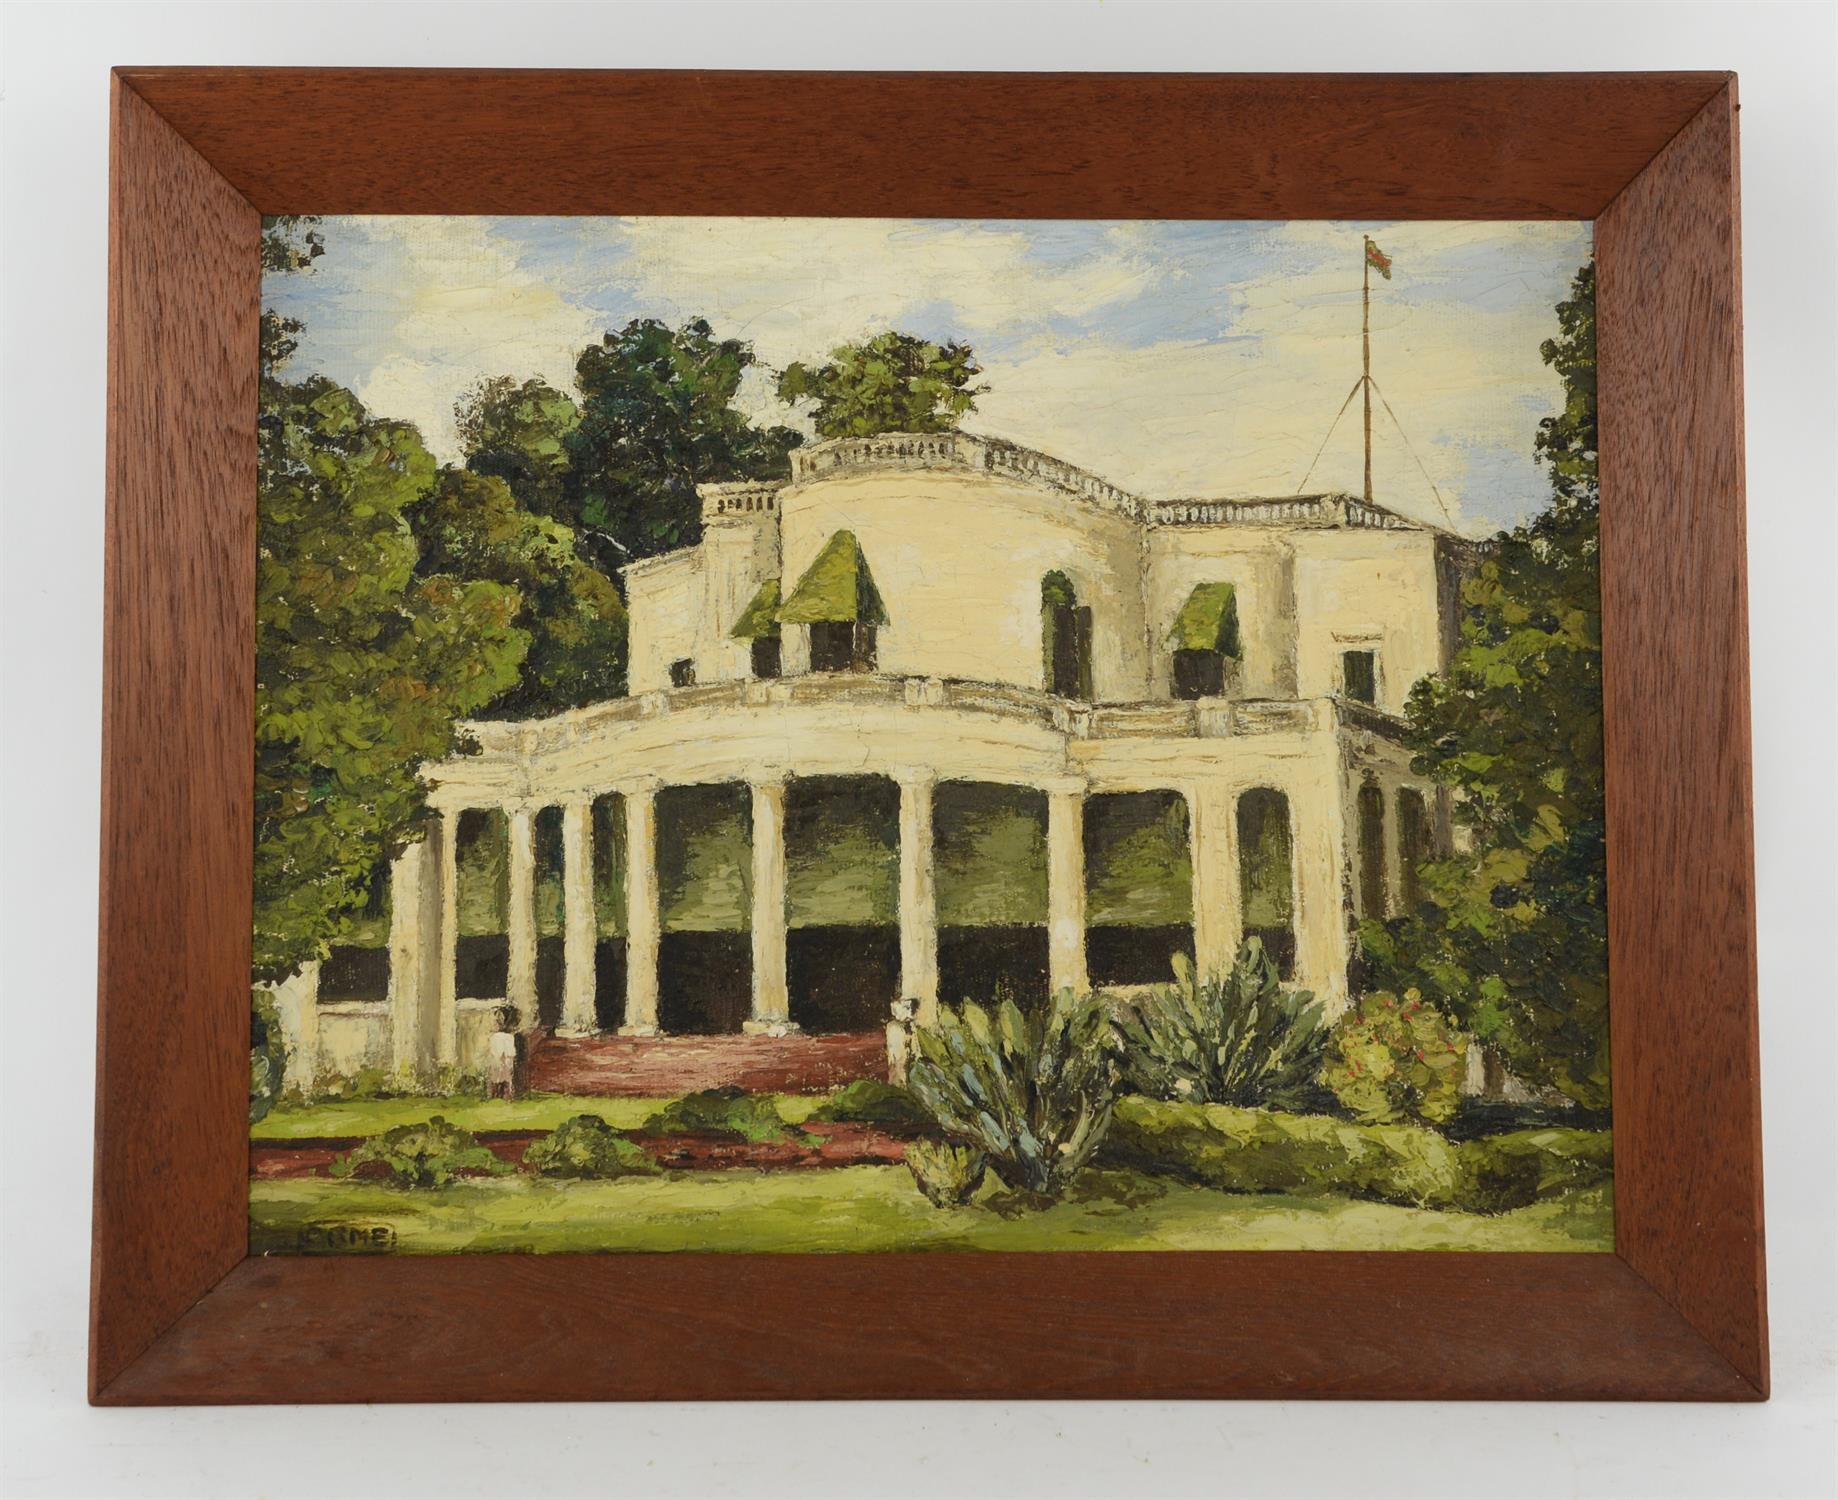 Orme? (20th century), A view of a Colonial residence, possibly India, oil on canvas,